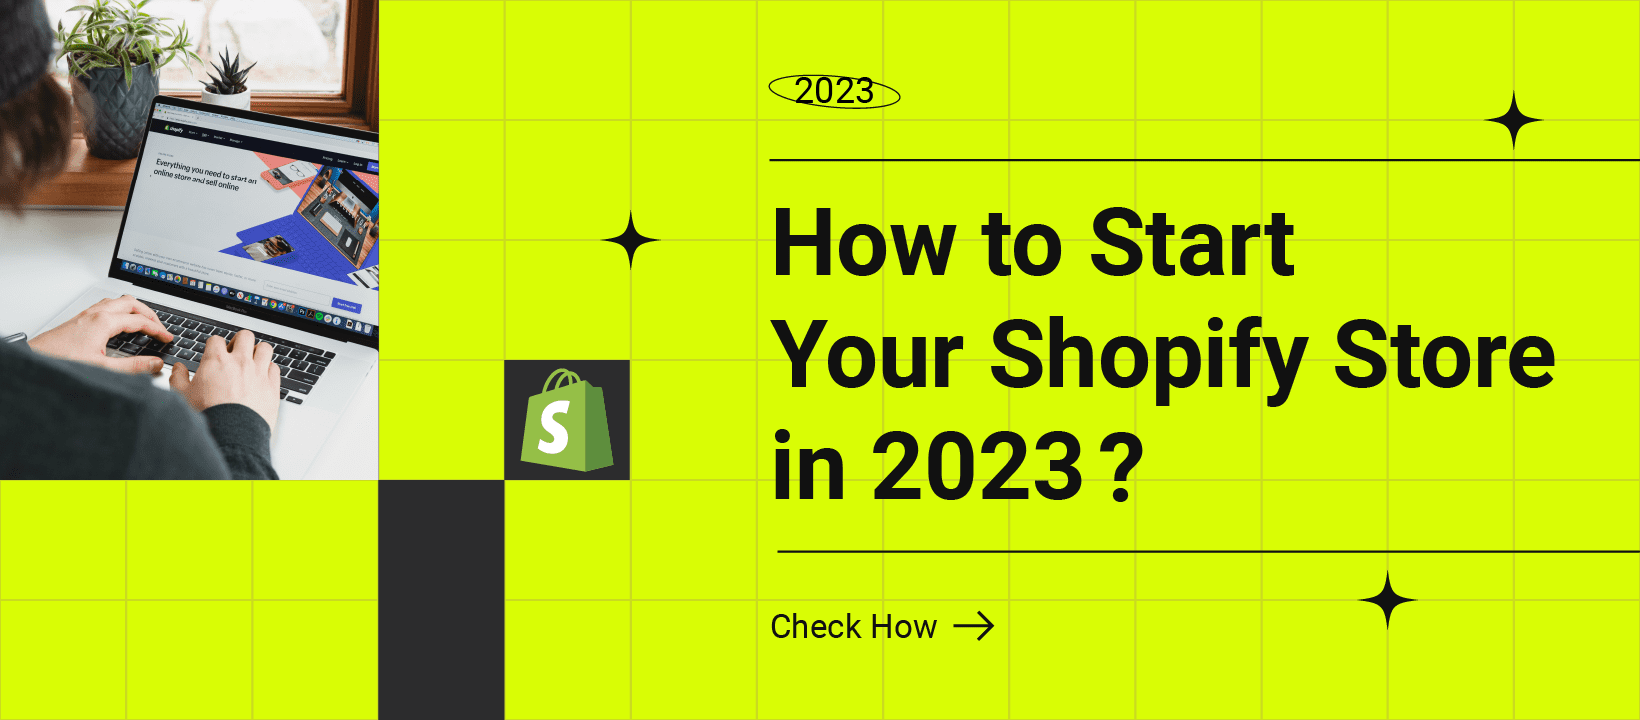 How to Start Your Shopify Store in 2023